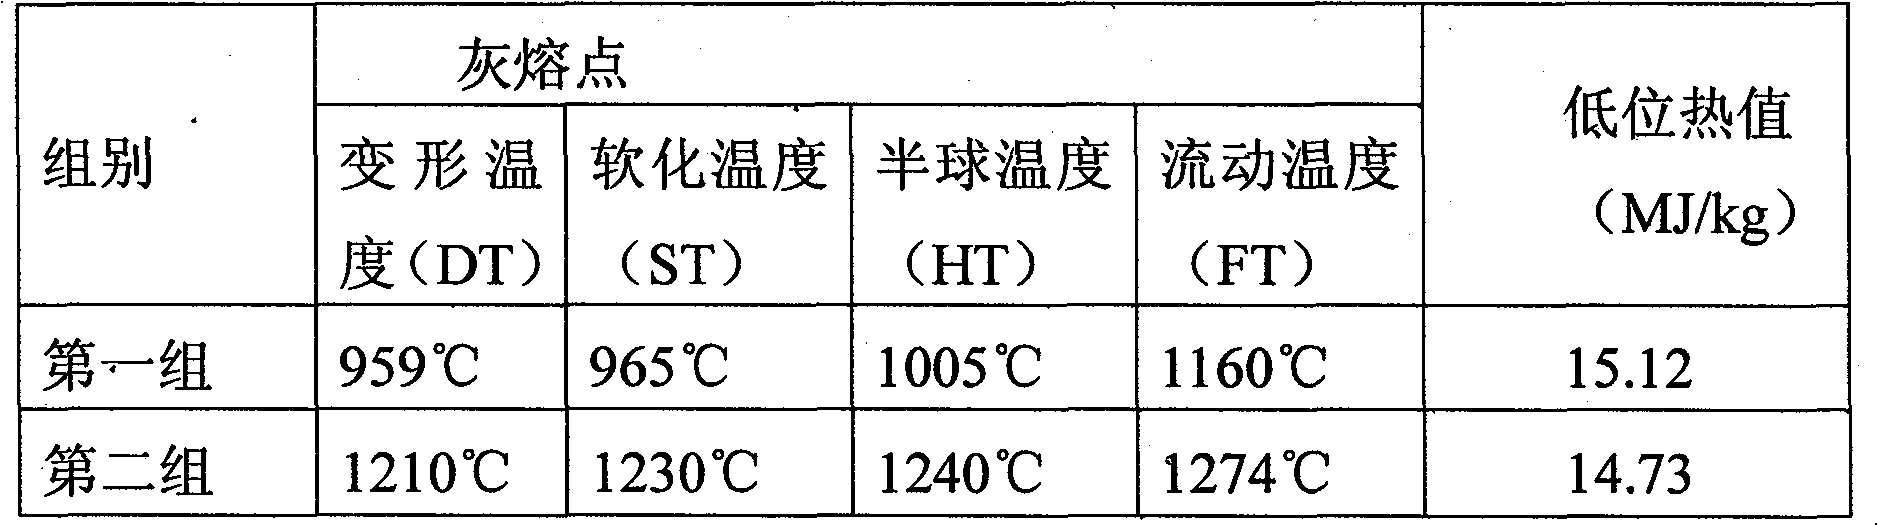 Biomass solid forming fuel additive